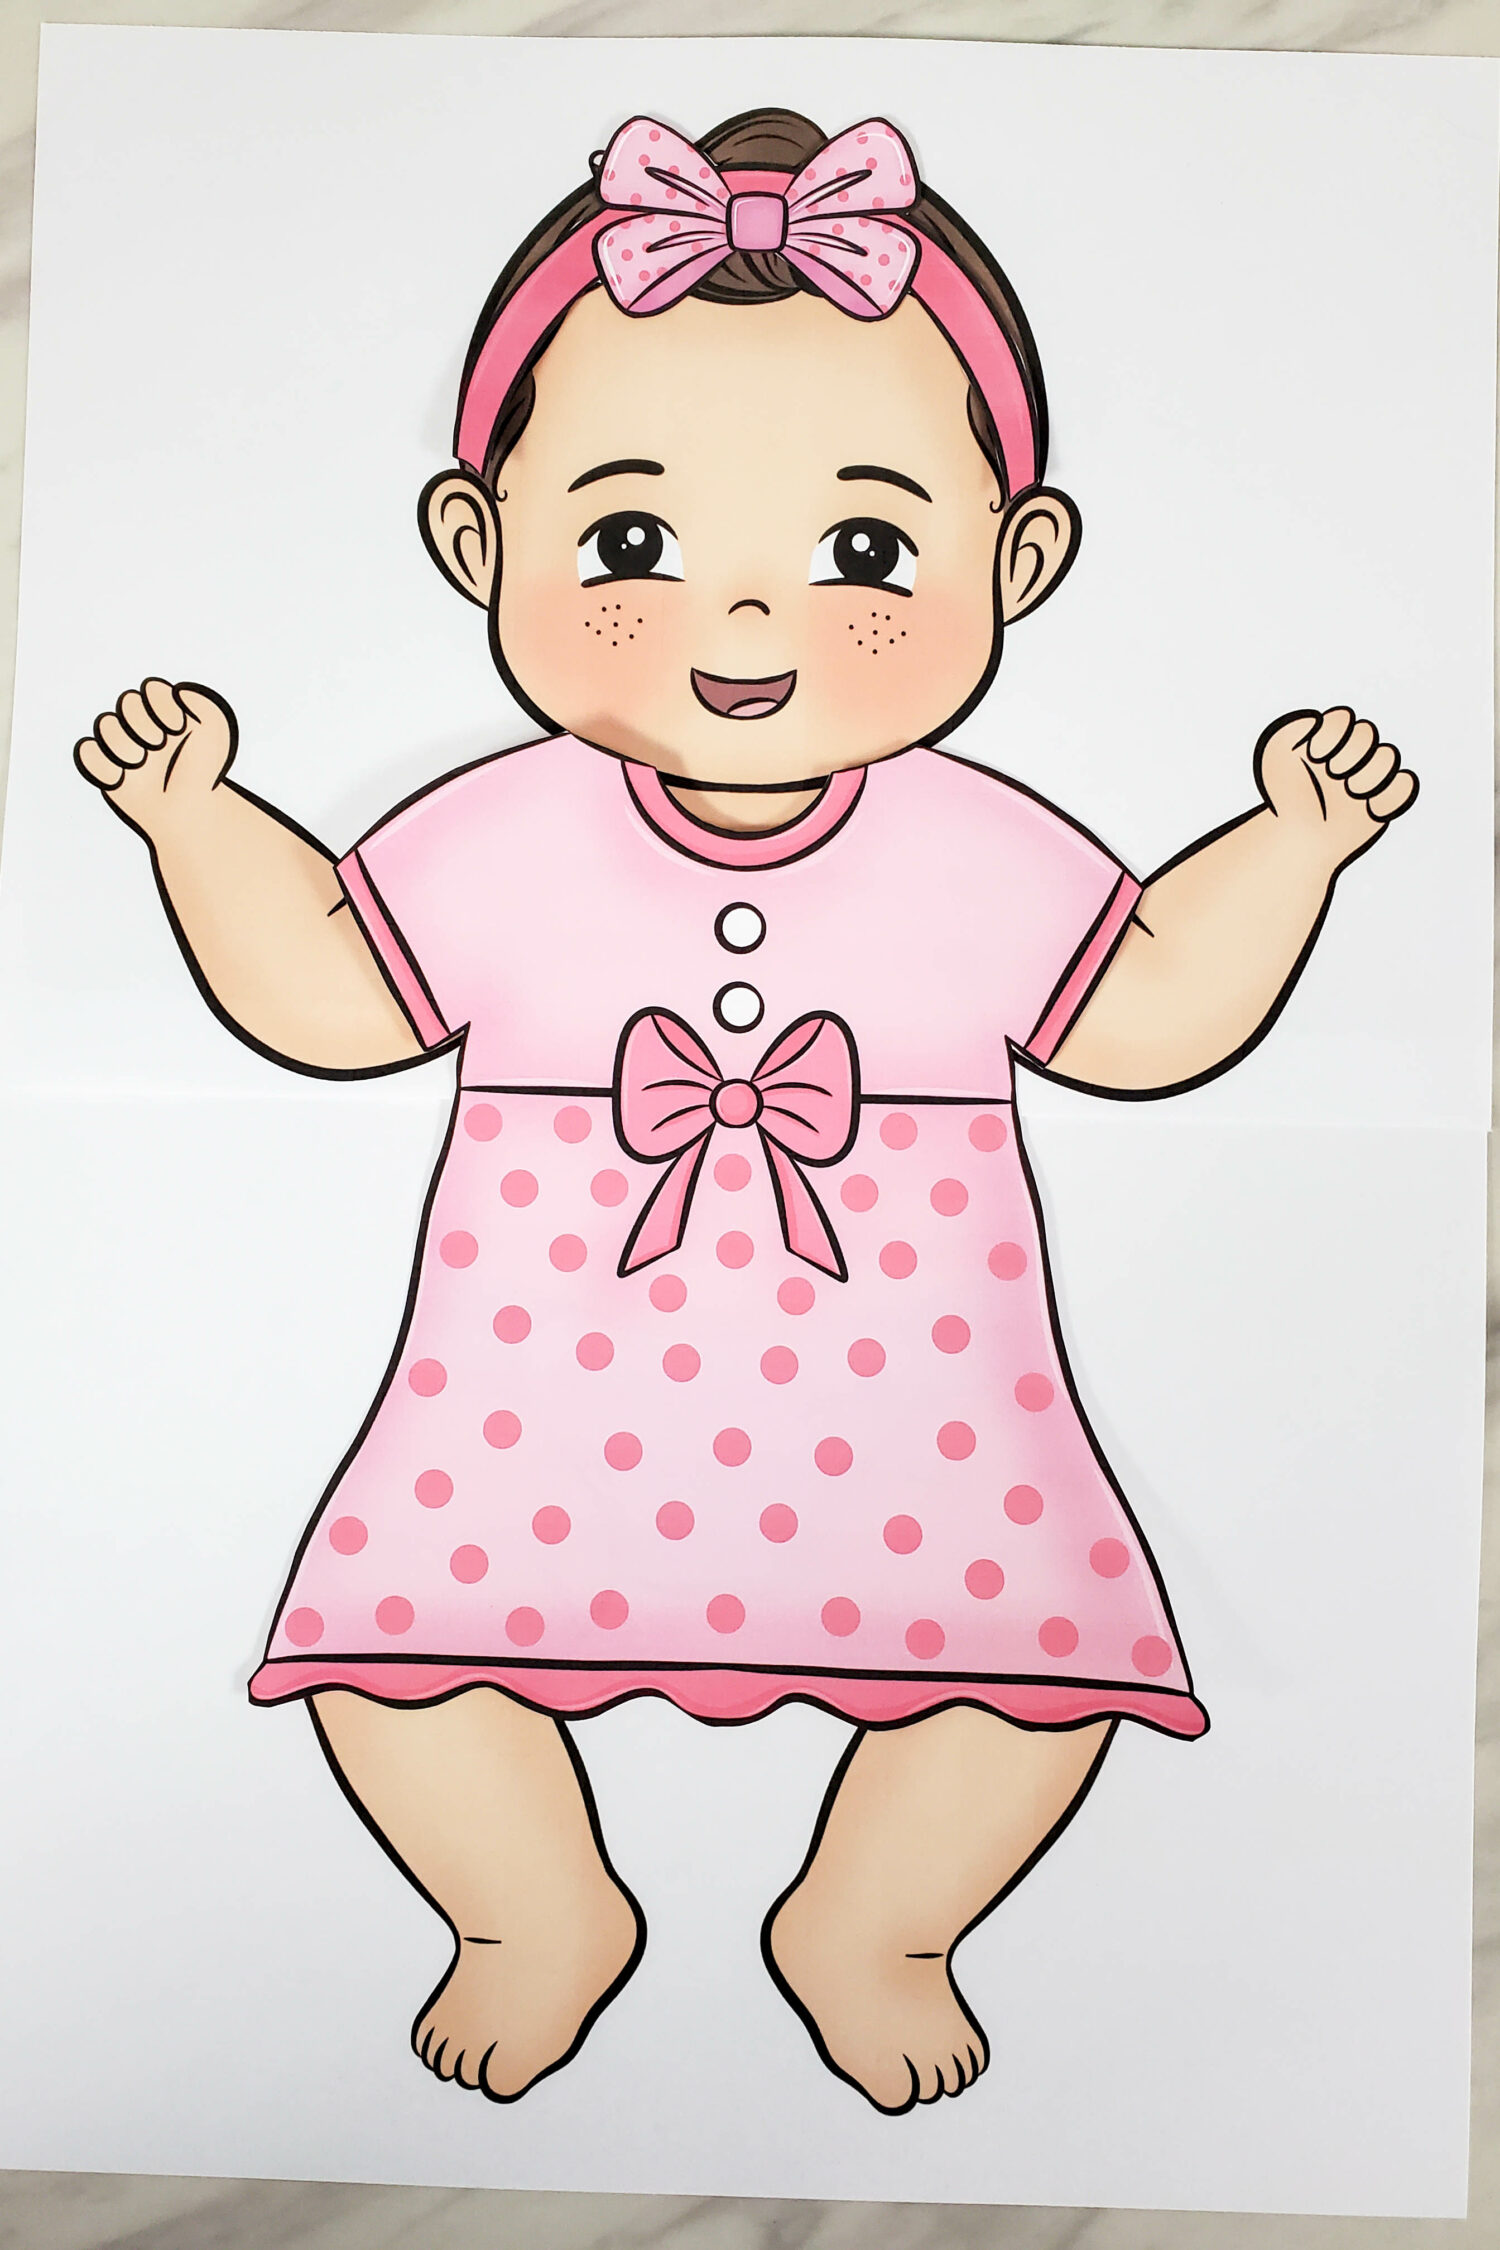 Mother's Day Taking Care of Baby singing time activity! Use this adorable printable baby care set of printable or this activity with a baby doll and accessories and paired with fun themed ways to sing cards to teach your choice of Mother's Day song! Printable teaching aids for LDS Primary Music Leaders.